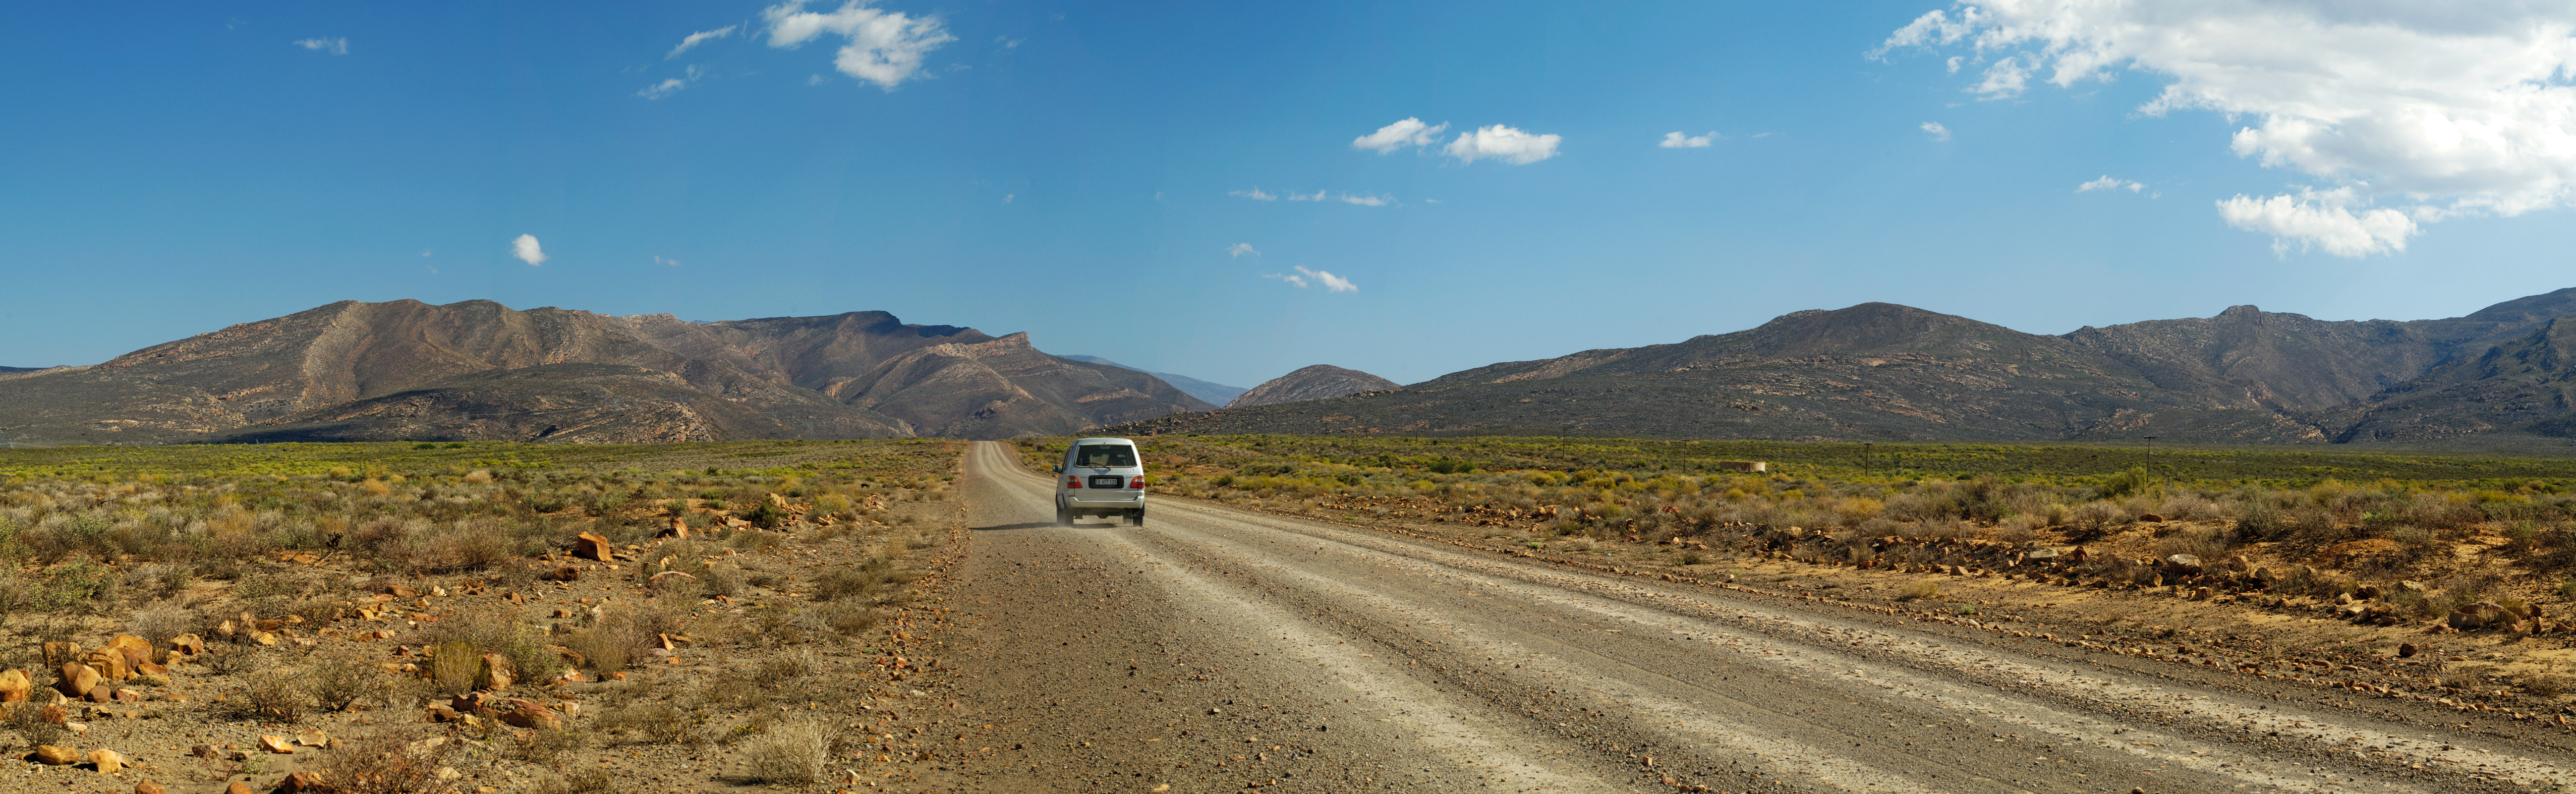 SOUTH AFRICA - May 2011: The R355 between Ceres and Calvinia is believed to be the longest gravel road between two towns in South Africa. The mountains around Karoo Poort are an impressive sight. Feature text available. (Photo by Gallo Images/GO!/Denver Hendricks)